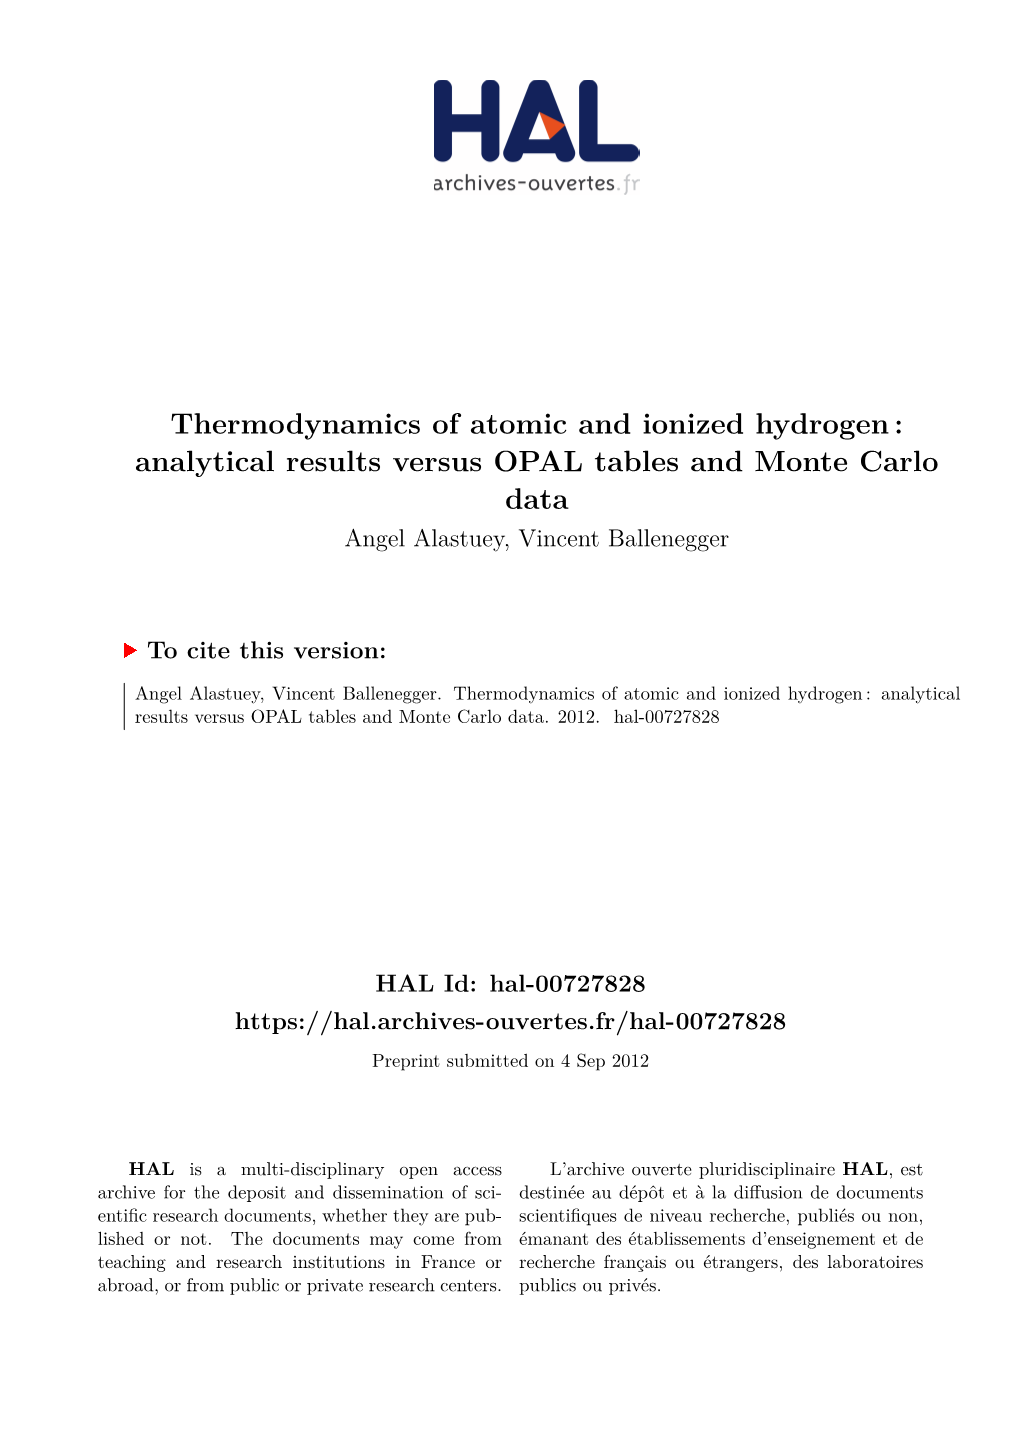 Thermodynamics of Atomic and Ionized Hydrogen : Analytical Results Versus OPAL Tables and Monte Carlo Data Angel Alastuey, Vincent Ballenegger